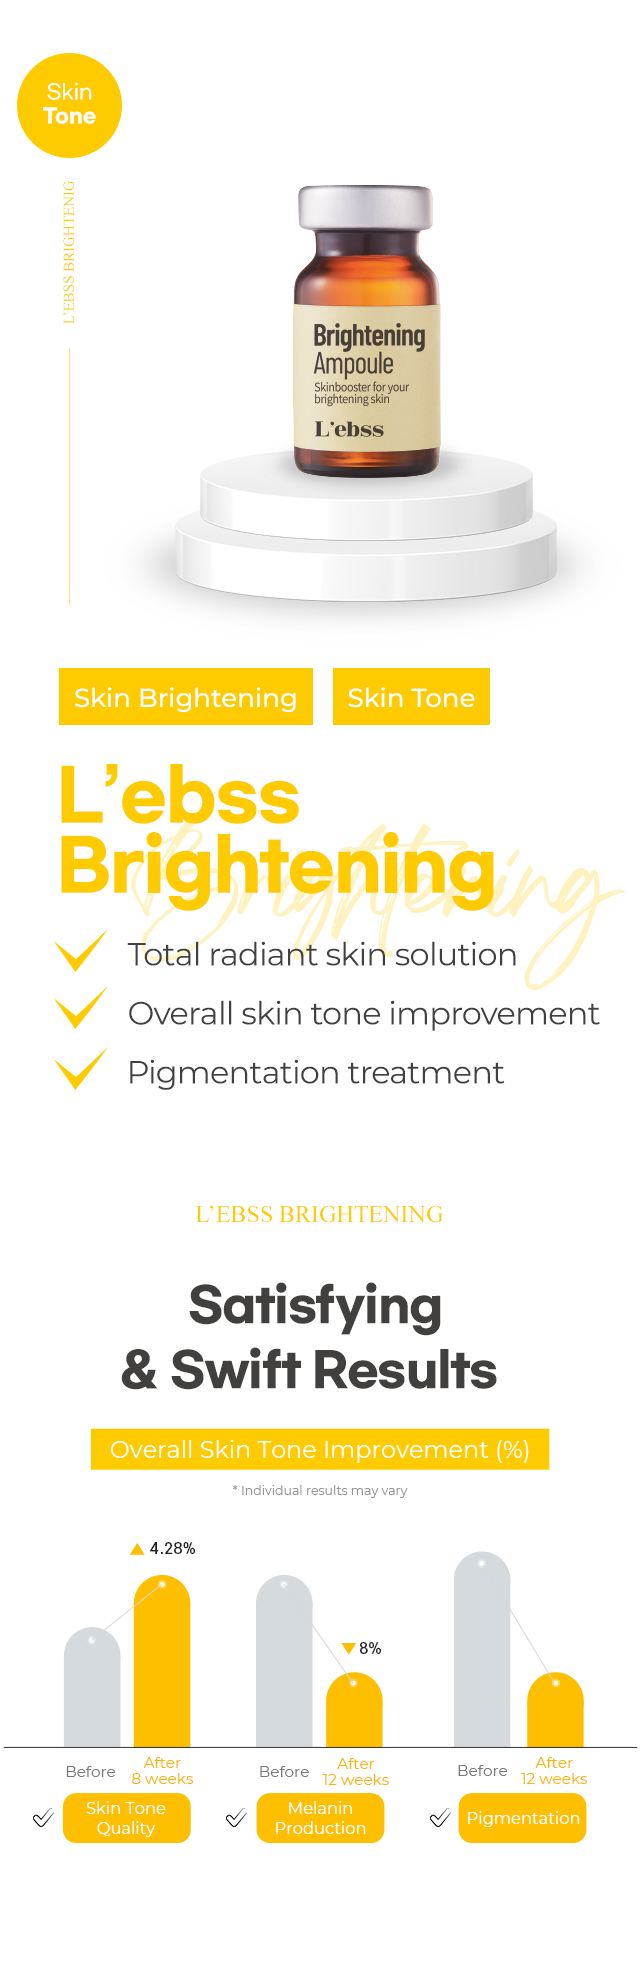 L'ebss Brightening MTS Microneedling skin booster descriptive page microneedling treatment for uneven skin tone and pigmentation in Korea